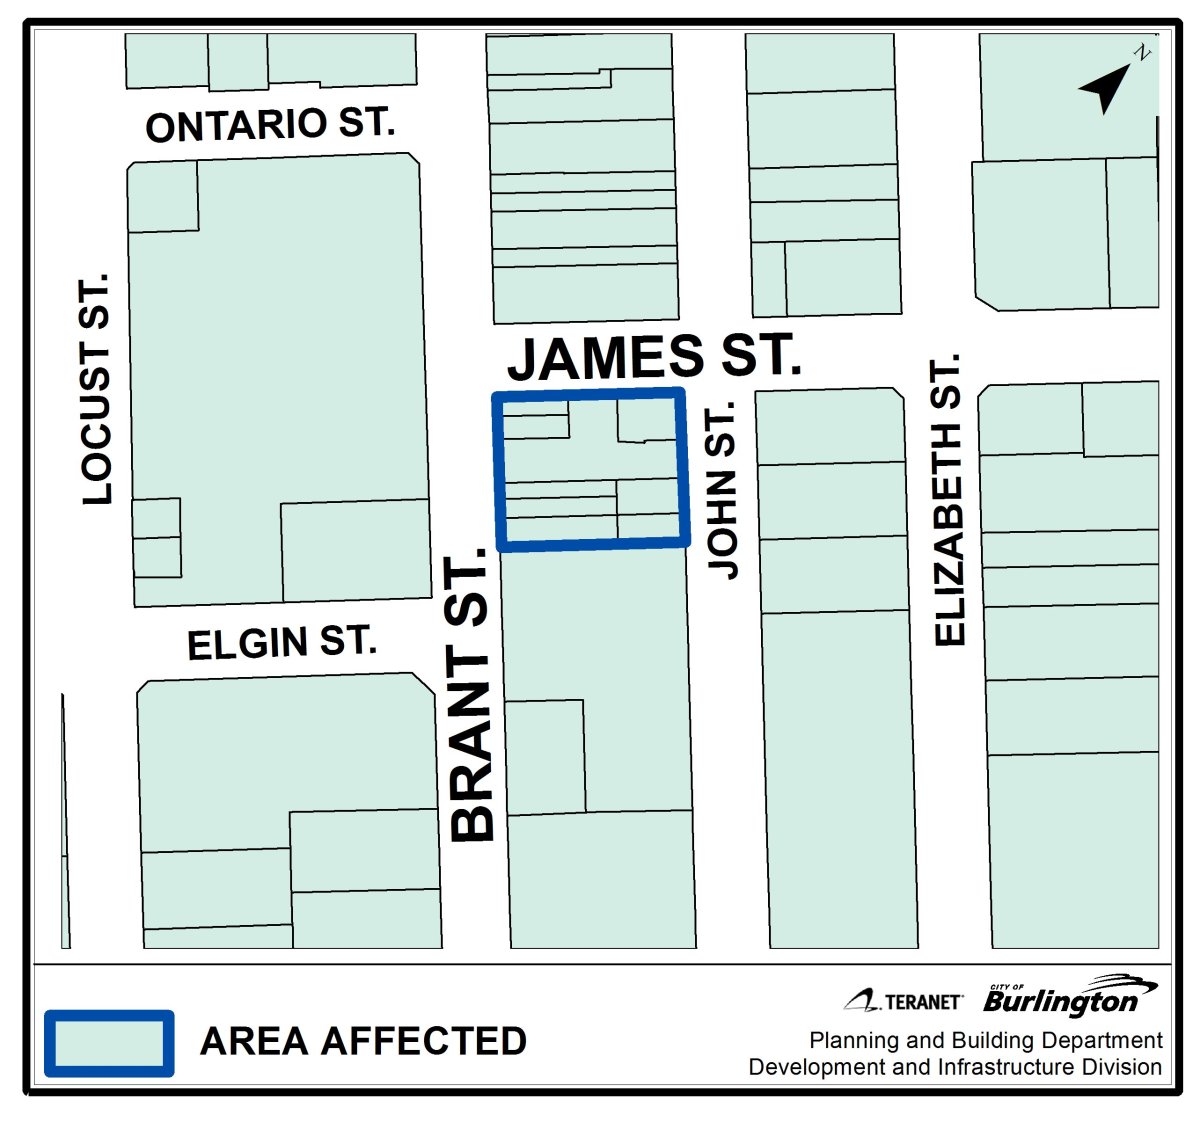 Burlington councillor warns ‘over-intensification’ concerns are being realized - image